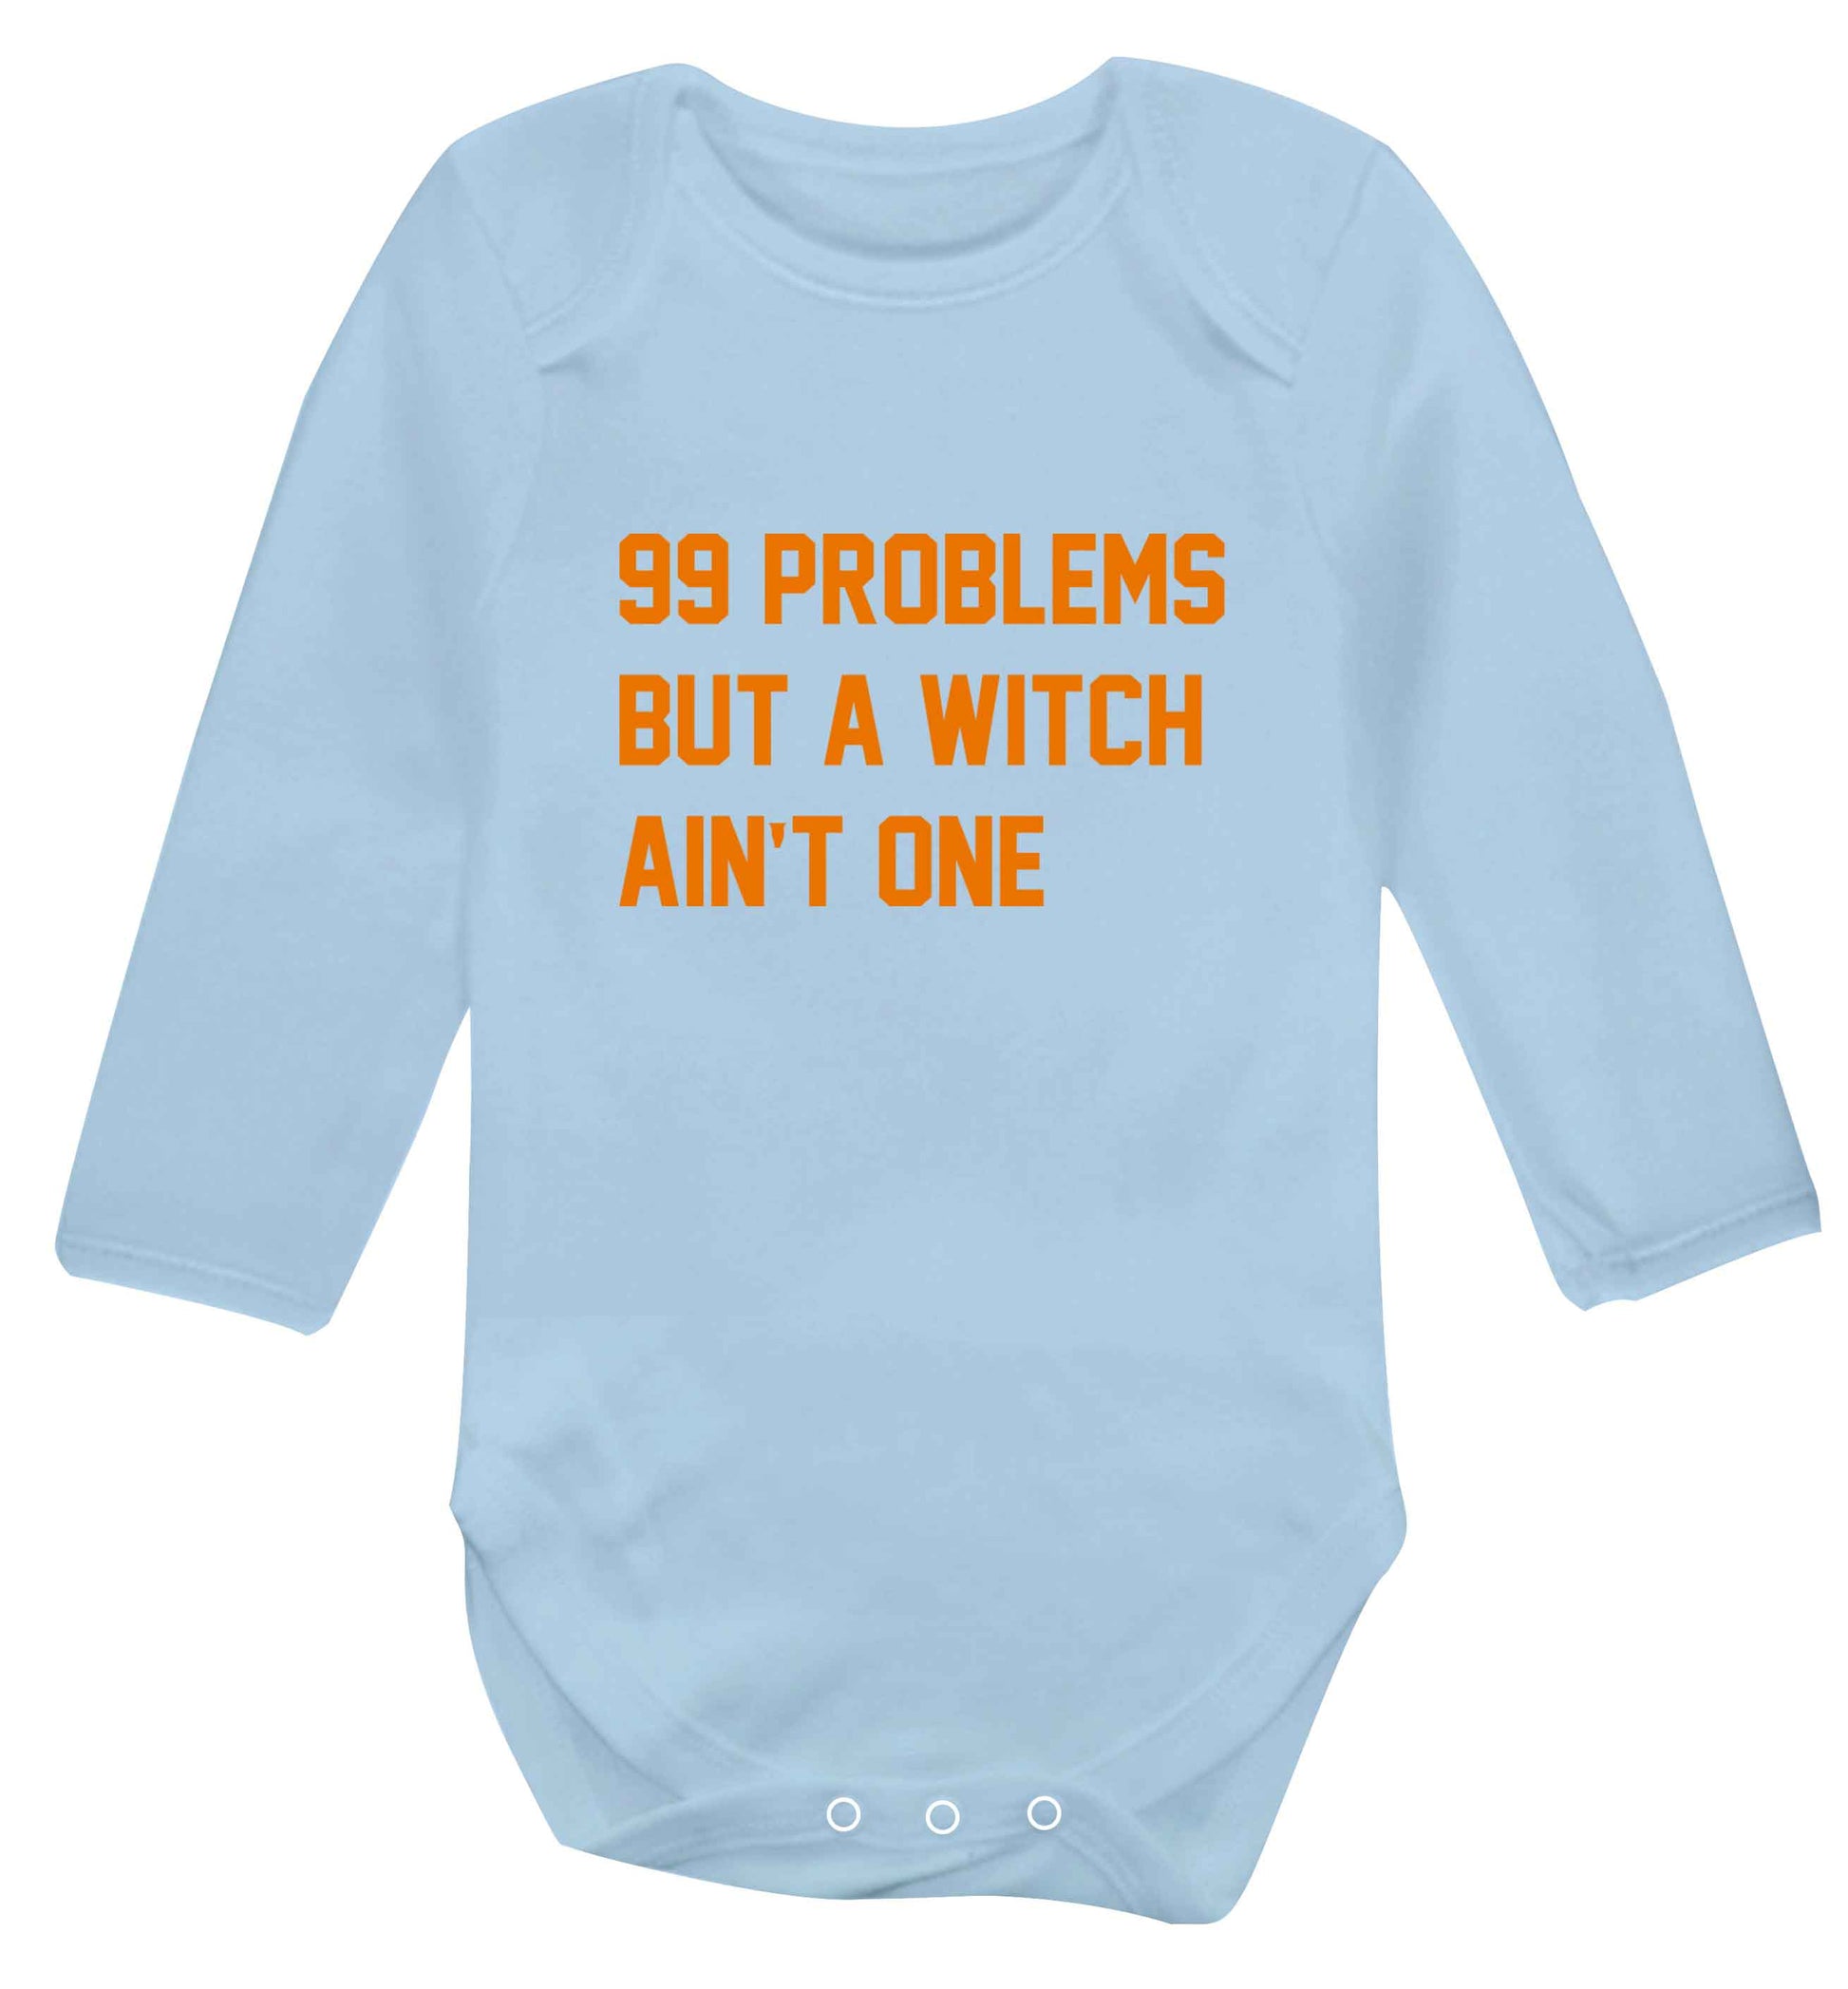 99 Problems but a witch aint one baby vest long sleeved pale blue 6-12 months